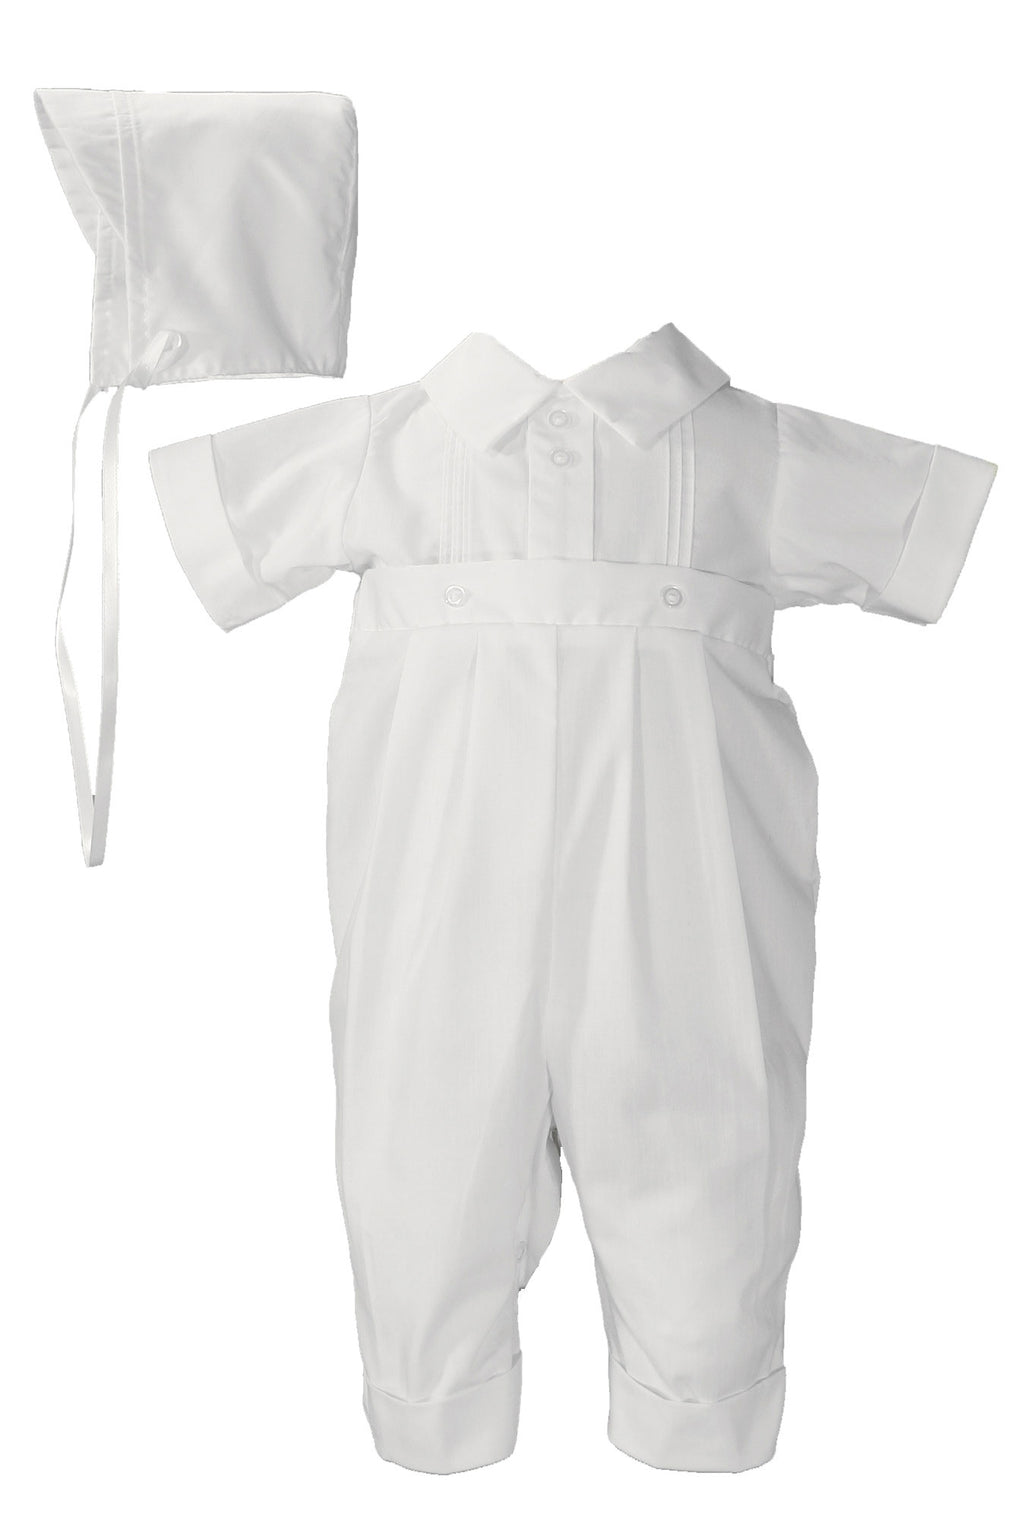 Boys Poly Cotton One Piece Christening Baptism Coverall with Pin Tucking (18 MONTHS) BJ01CS18